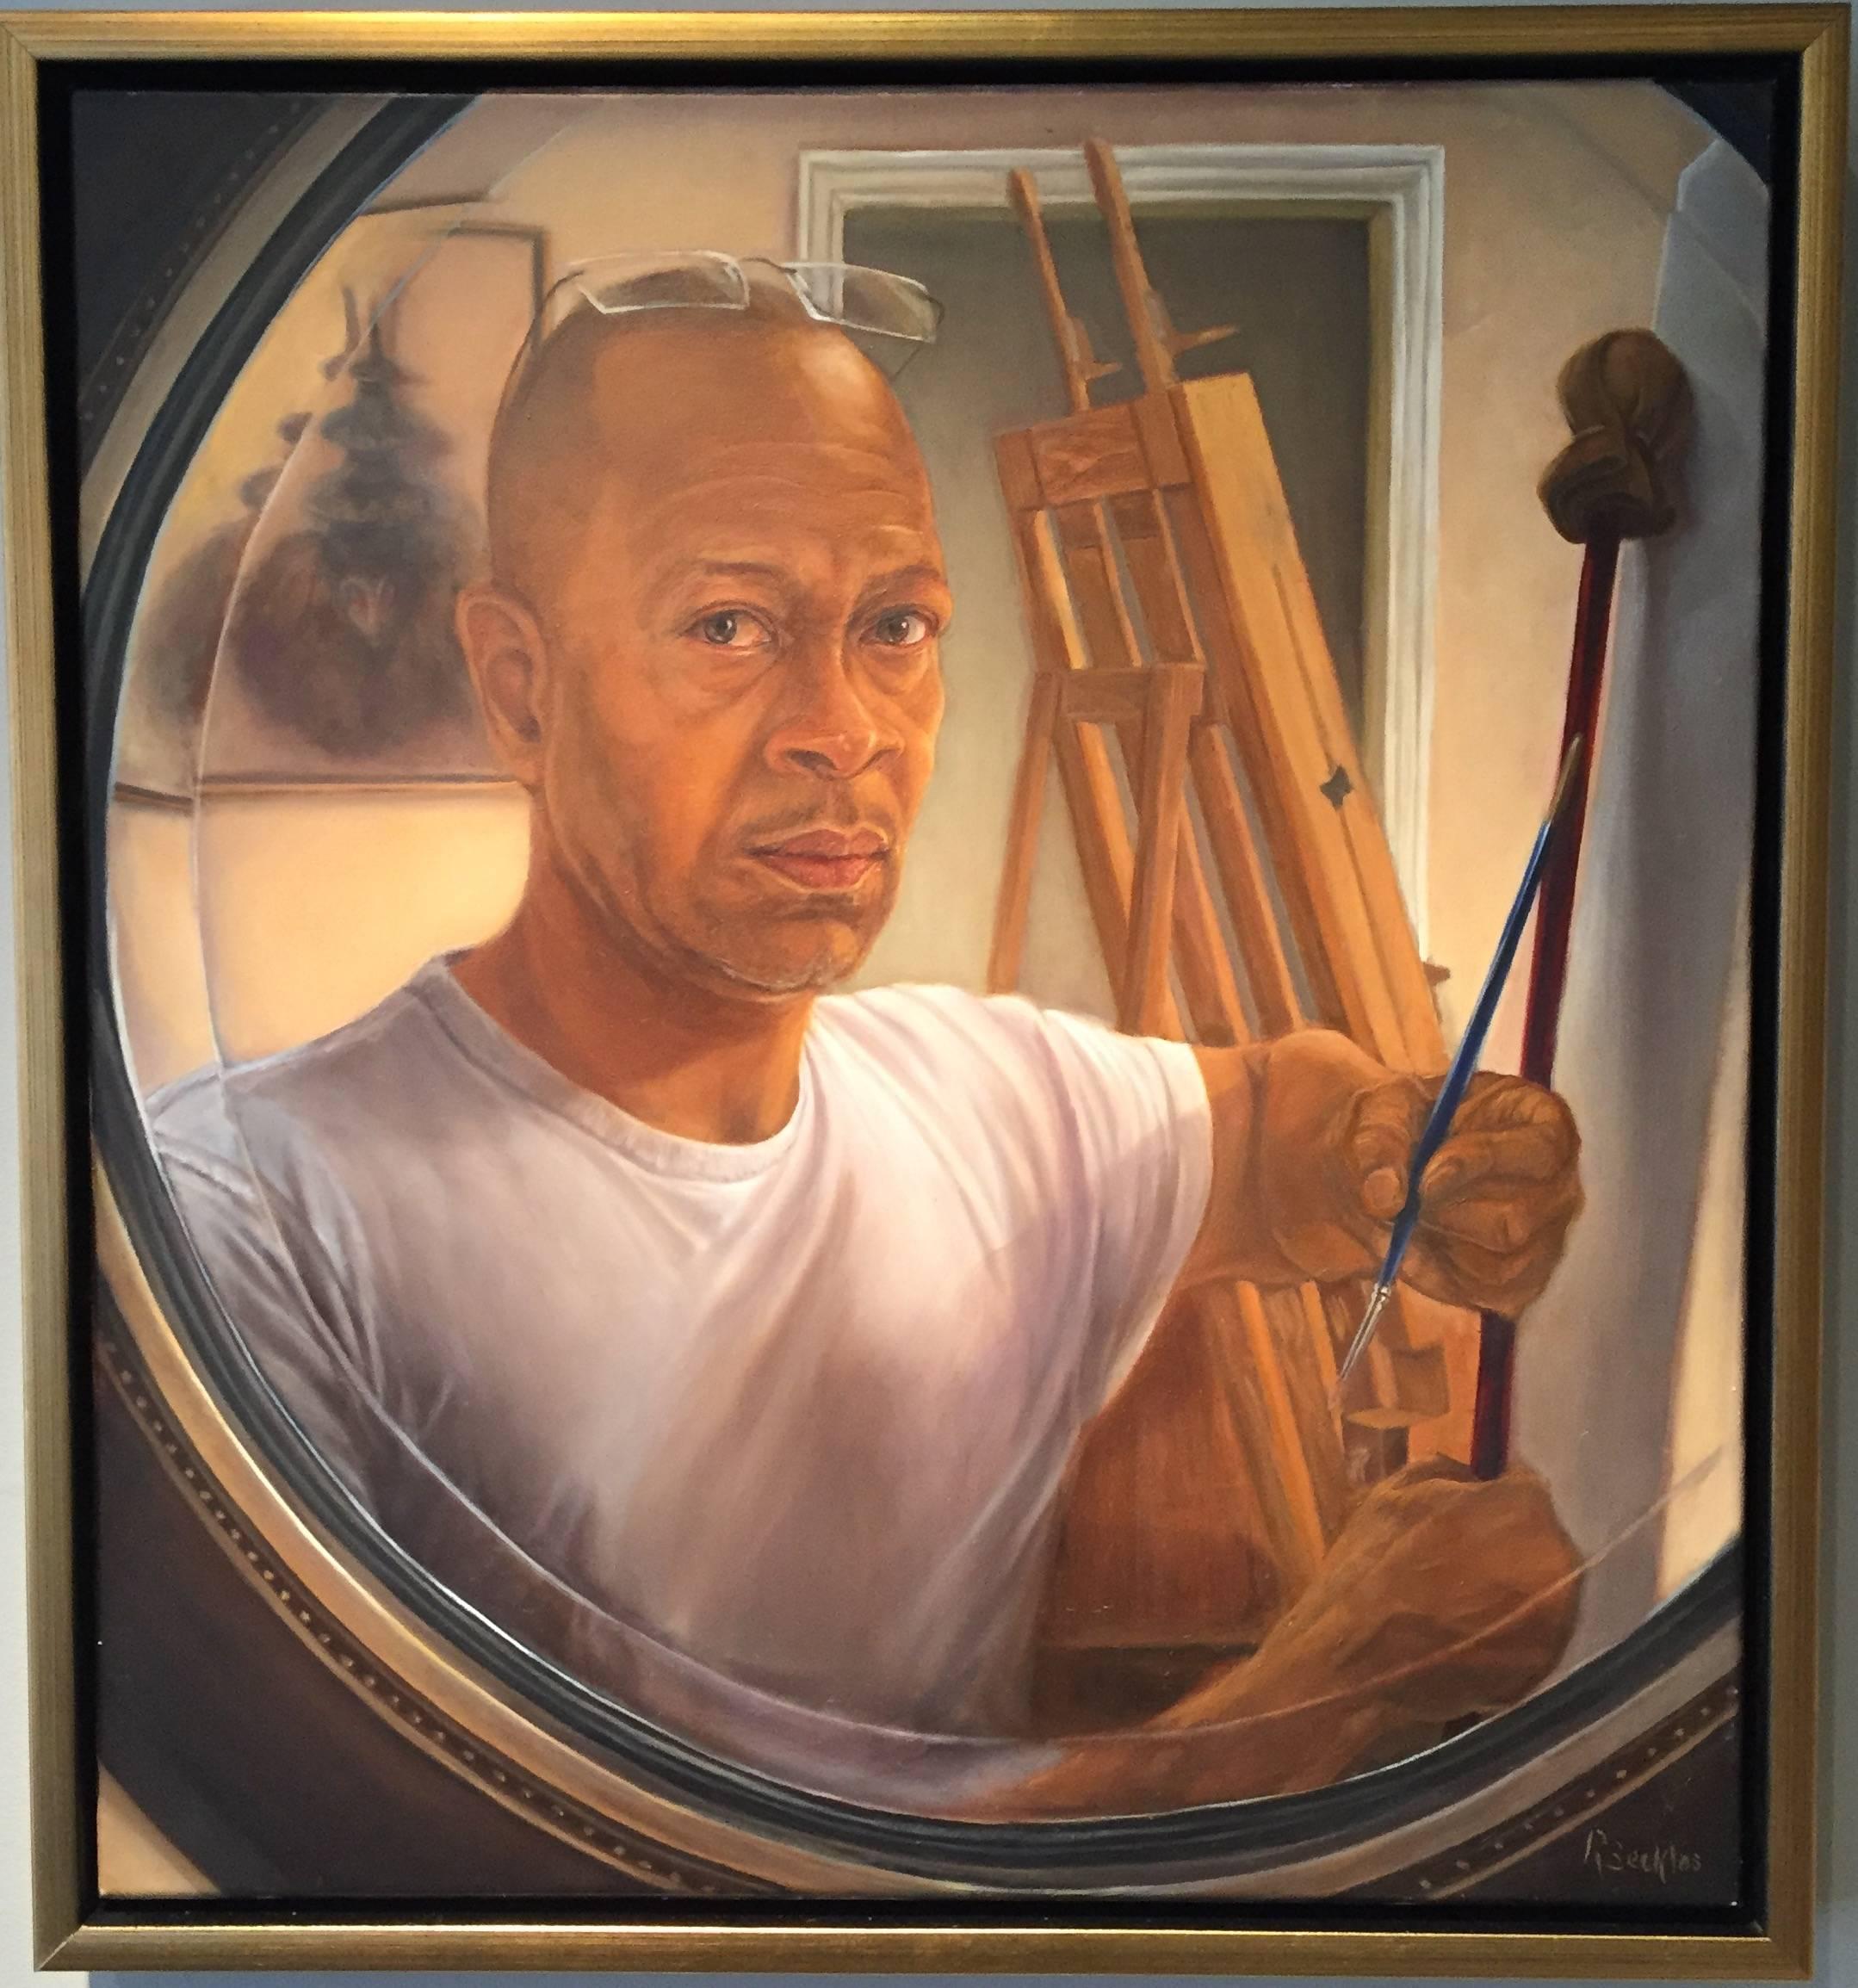 Mirror Imaged - Painting by Roger Beckles